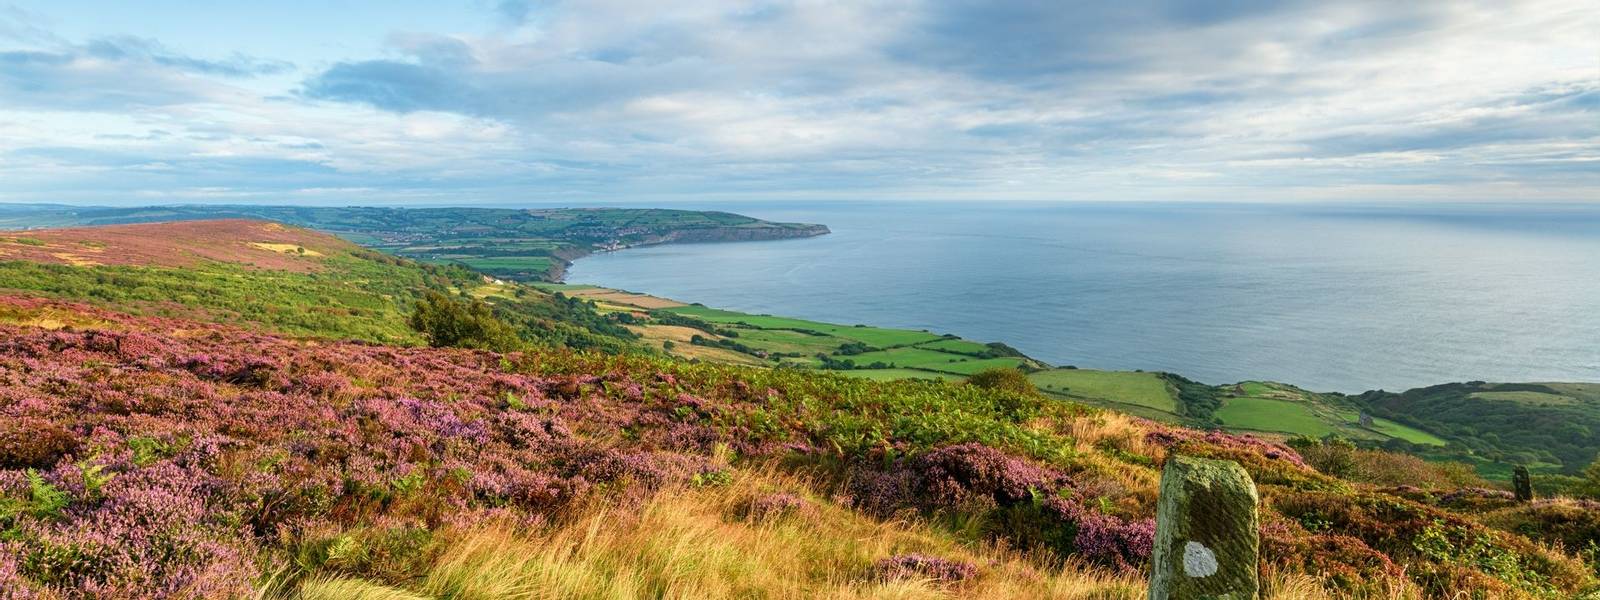 Summer on the North York Moors national park in Yorkshire, from Ravenscar looking out to Robin Hood's Bay